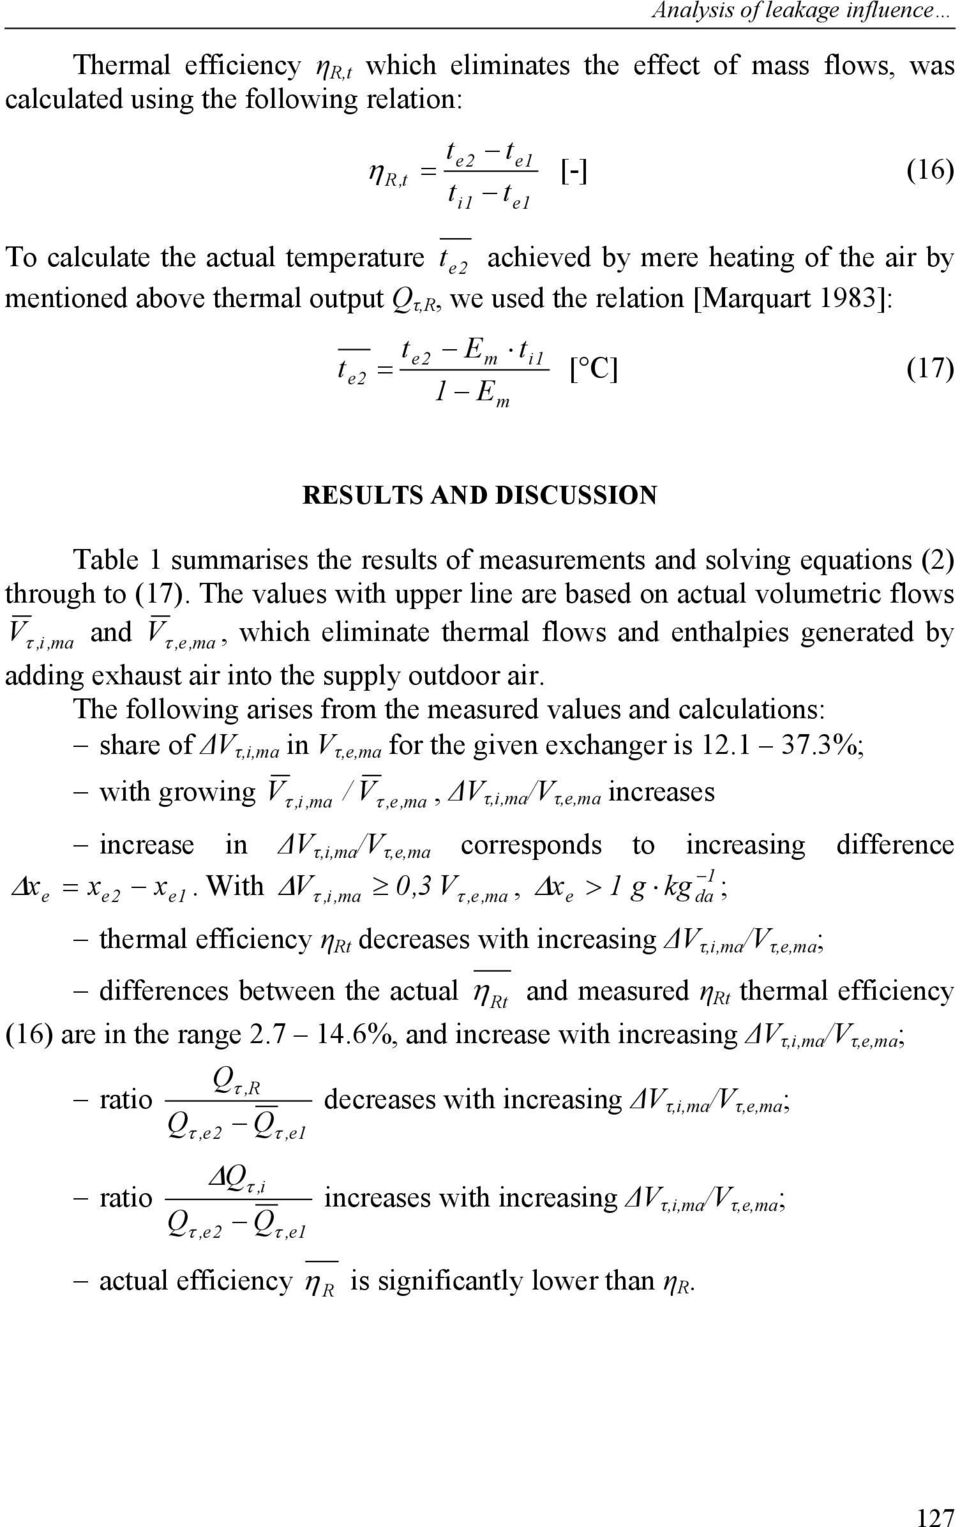 summarises the results of measurements and solving equations (2) through to (7).